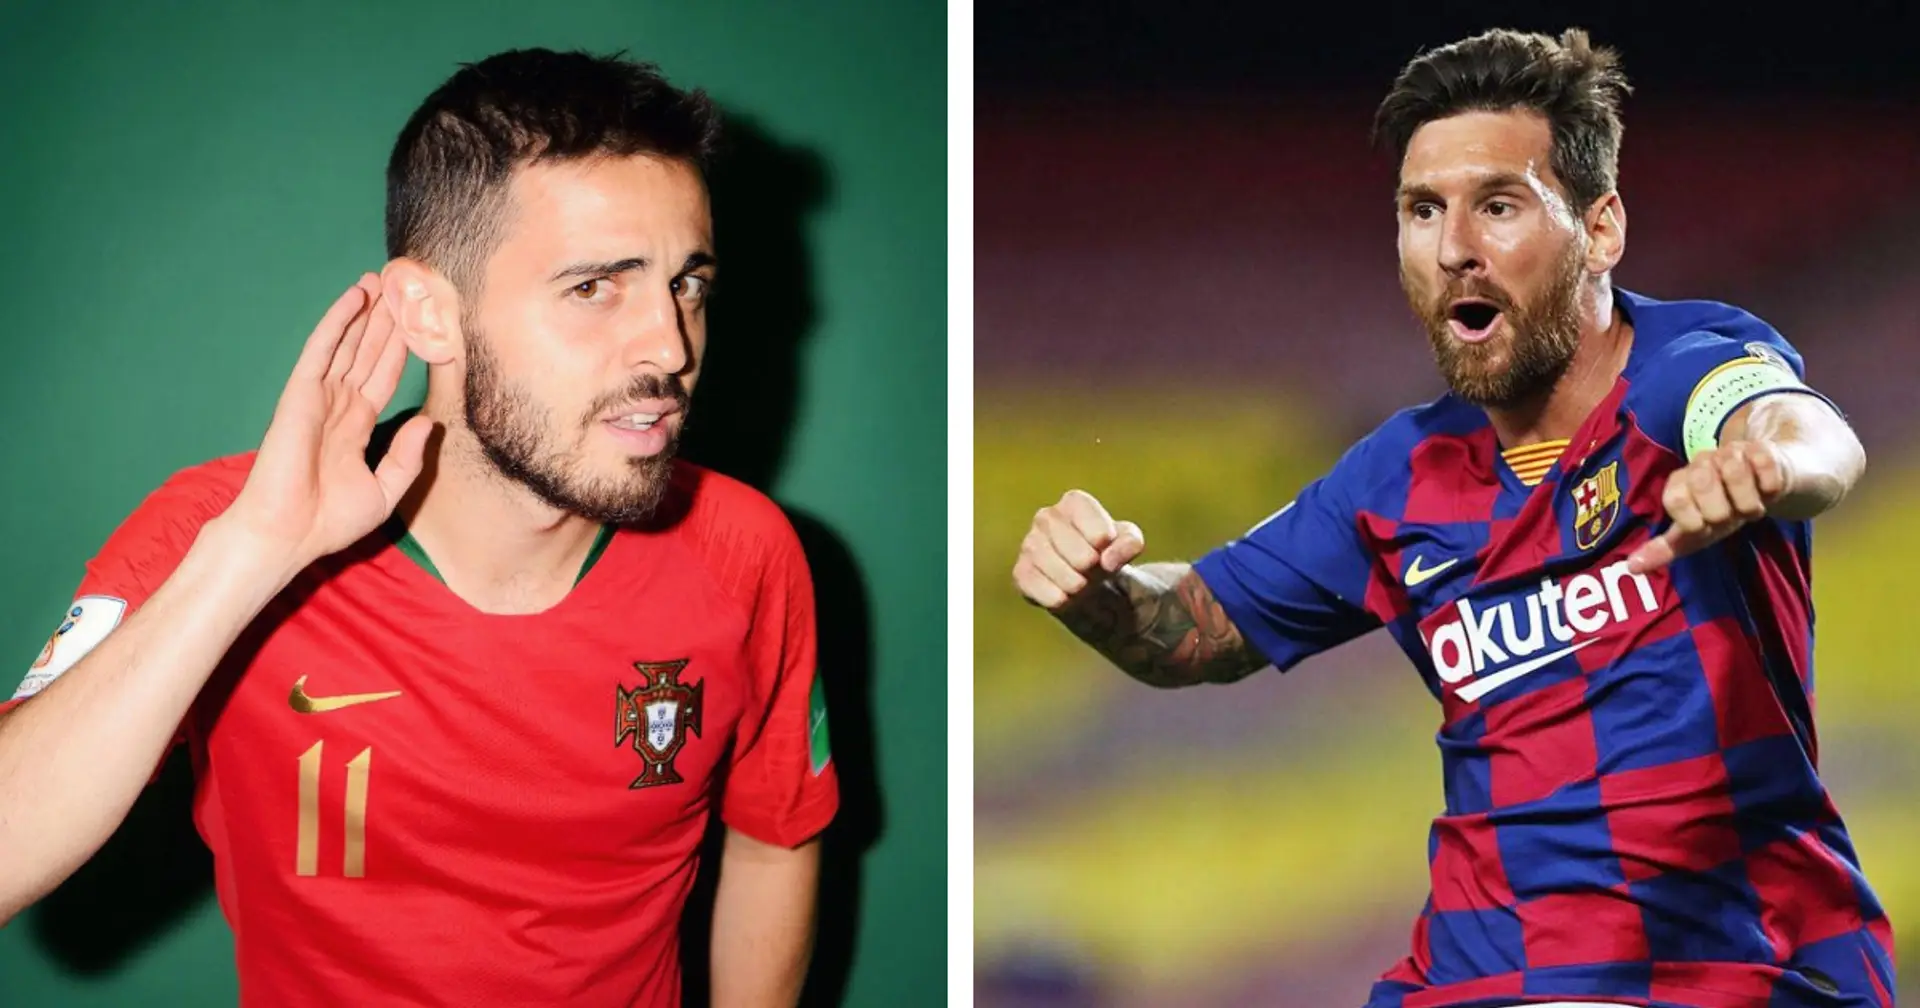 Bernardo Silva's not so old quote about Leo Messi could get Barca fans raving